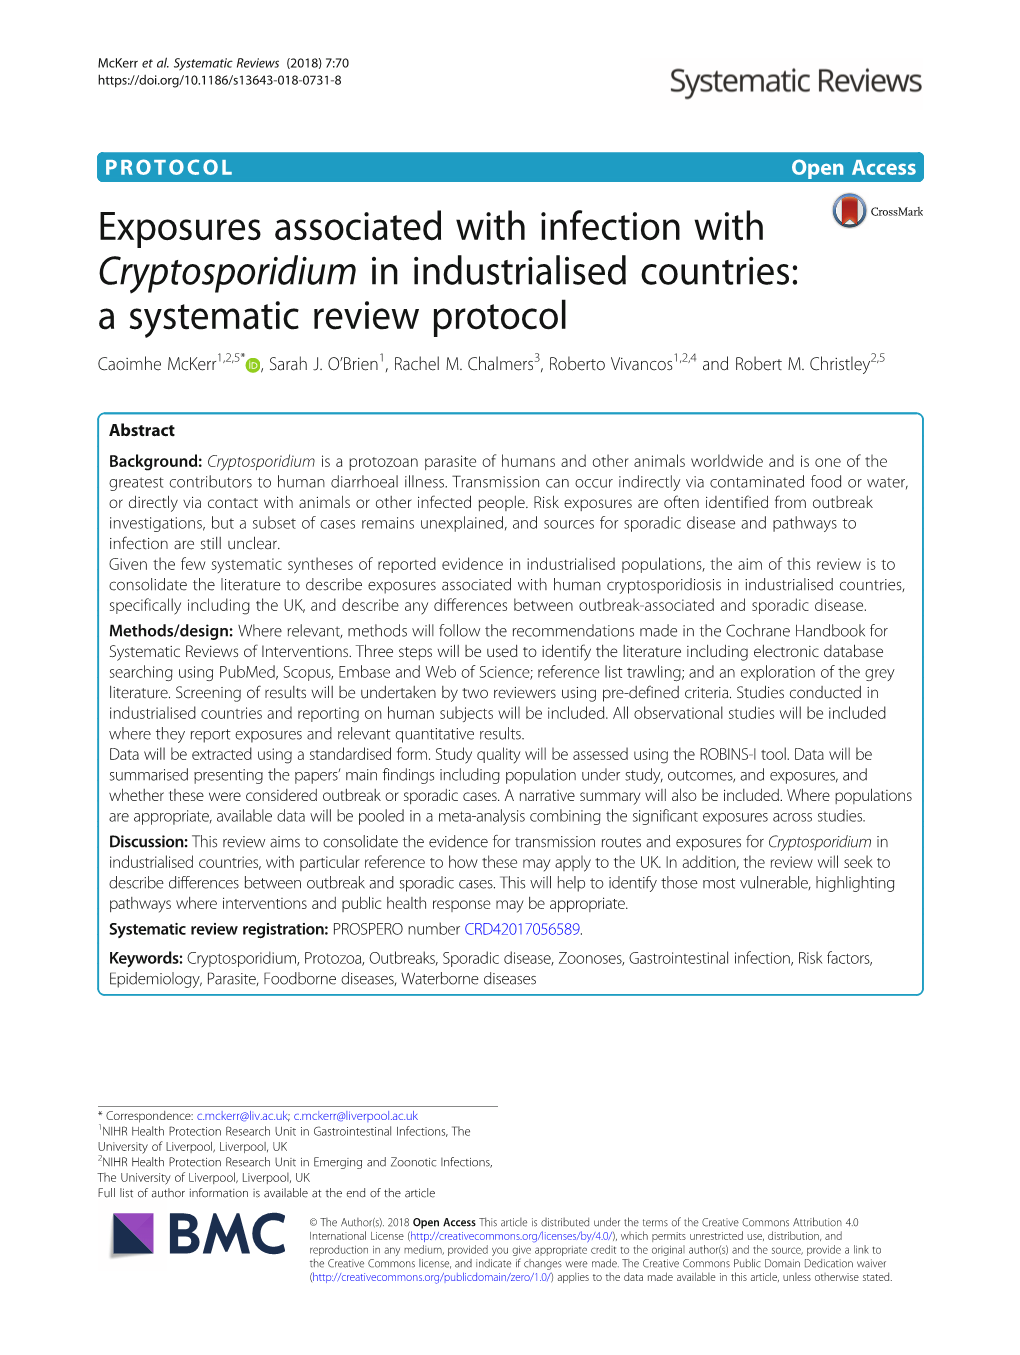 Exposures Associated with Infection with Cryptosporidium in Industrialised Countries: a Systematic Review Protocol Caoimhe Mckerr1,2,5* , Sarah J